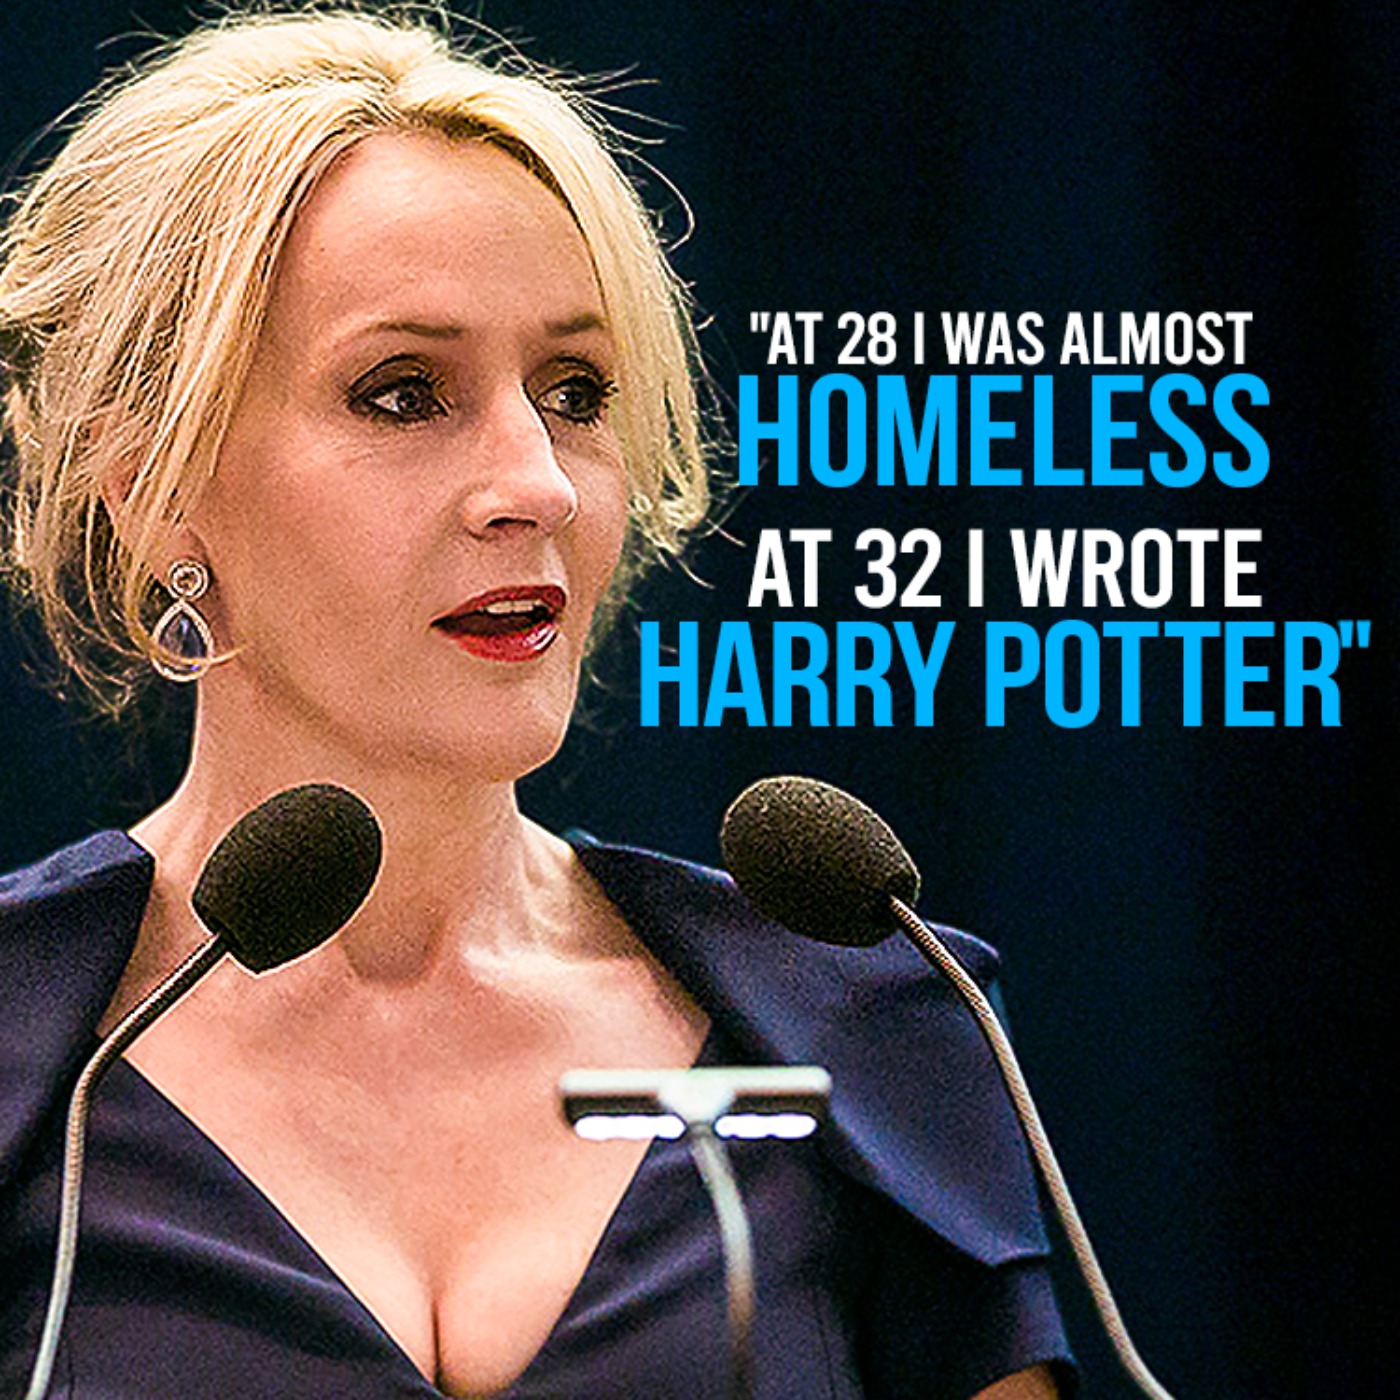 JK Rowling's Ultimate Advice for Students and Young People